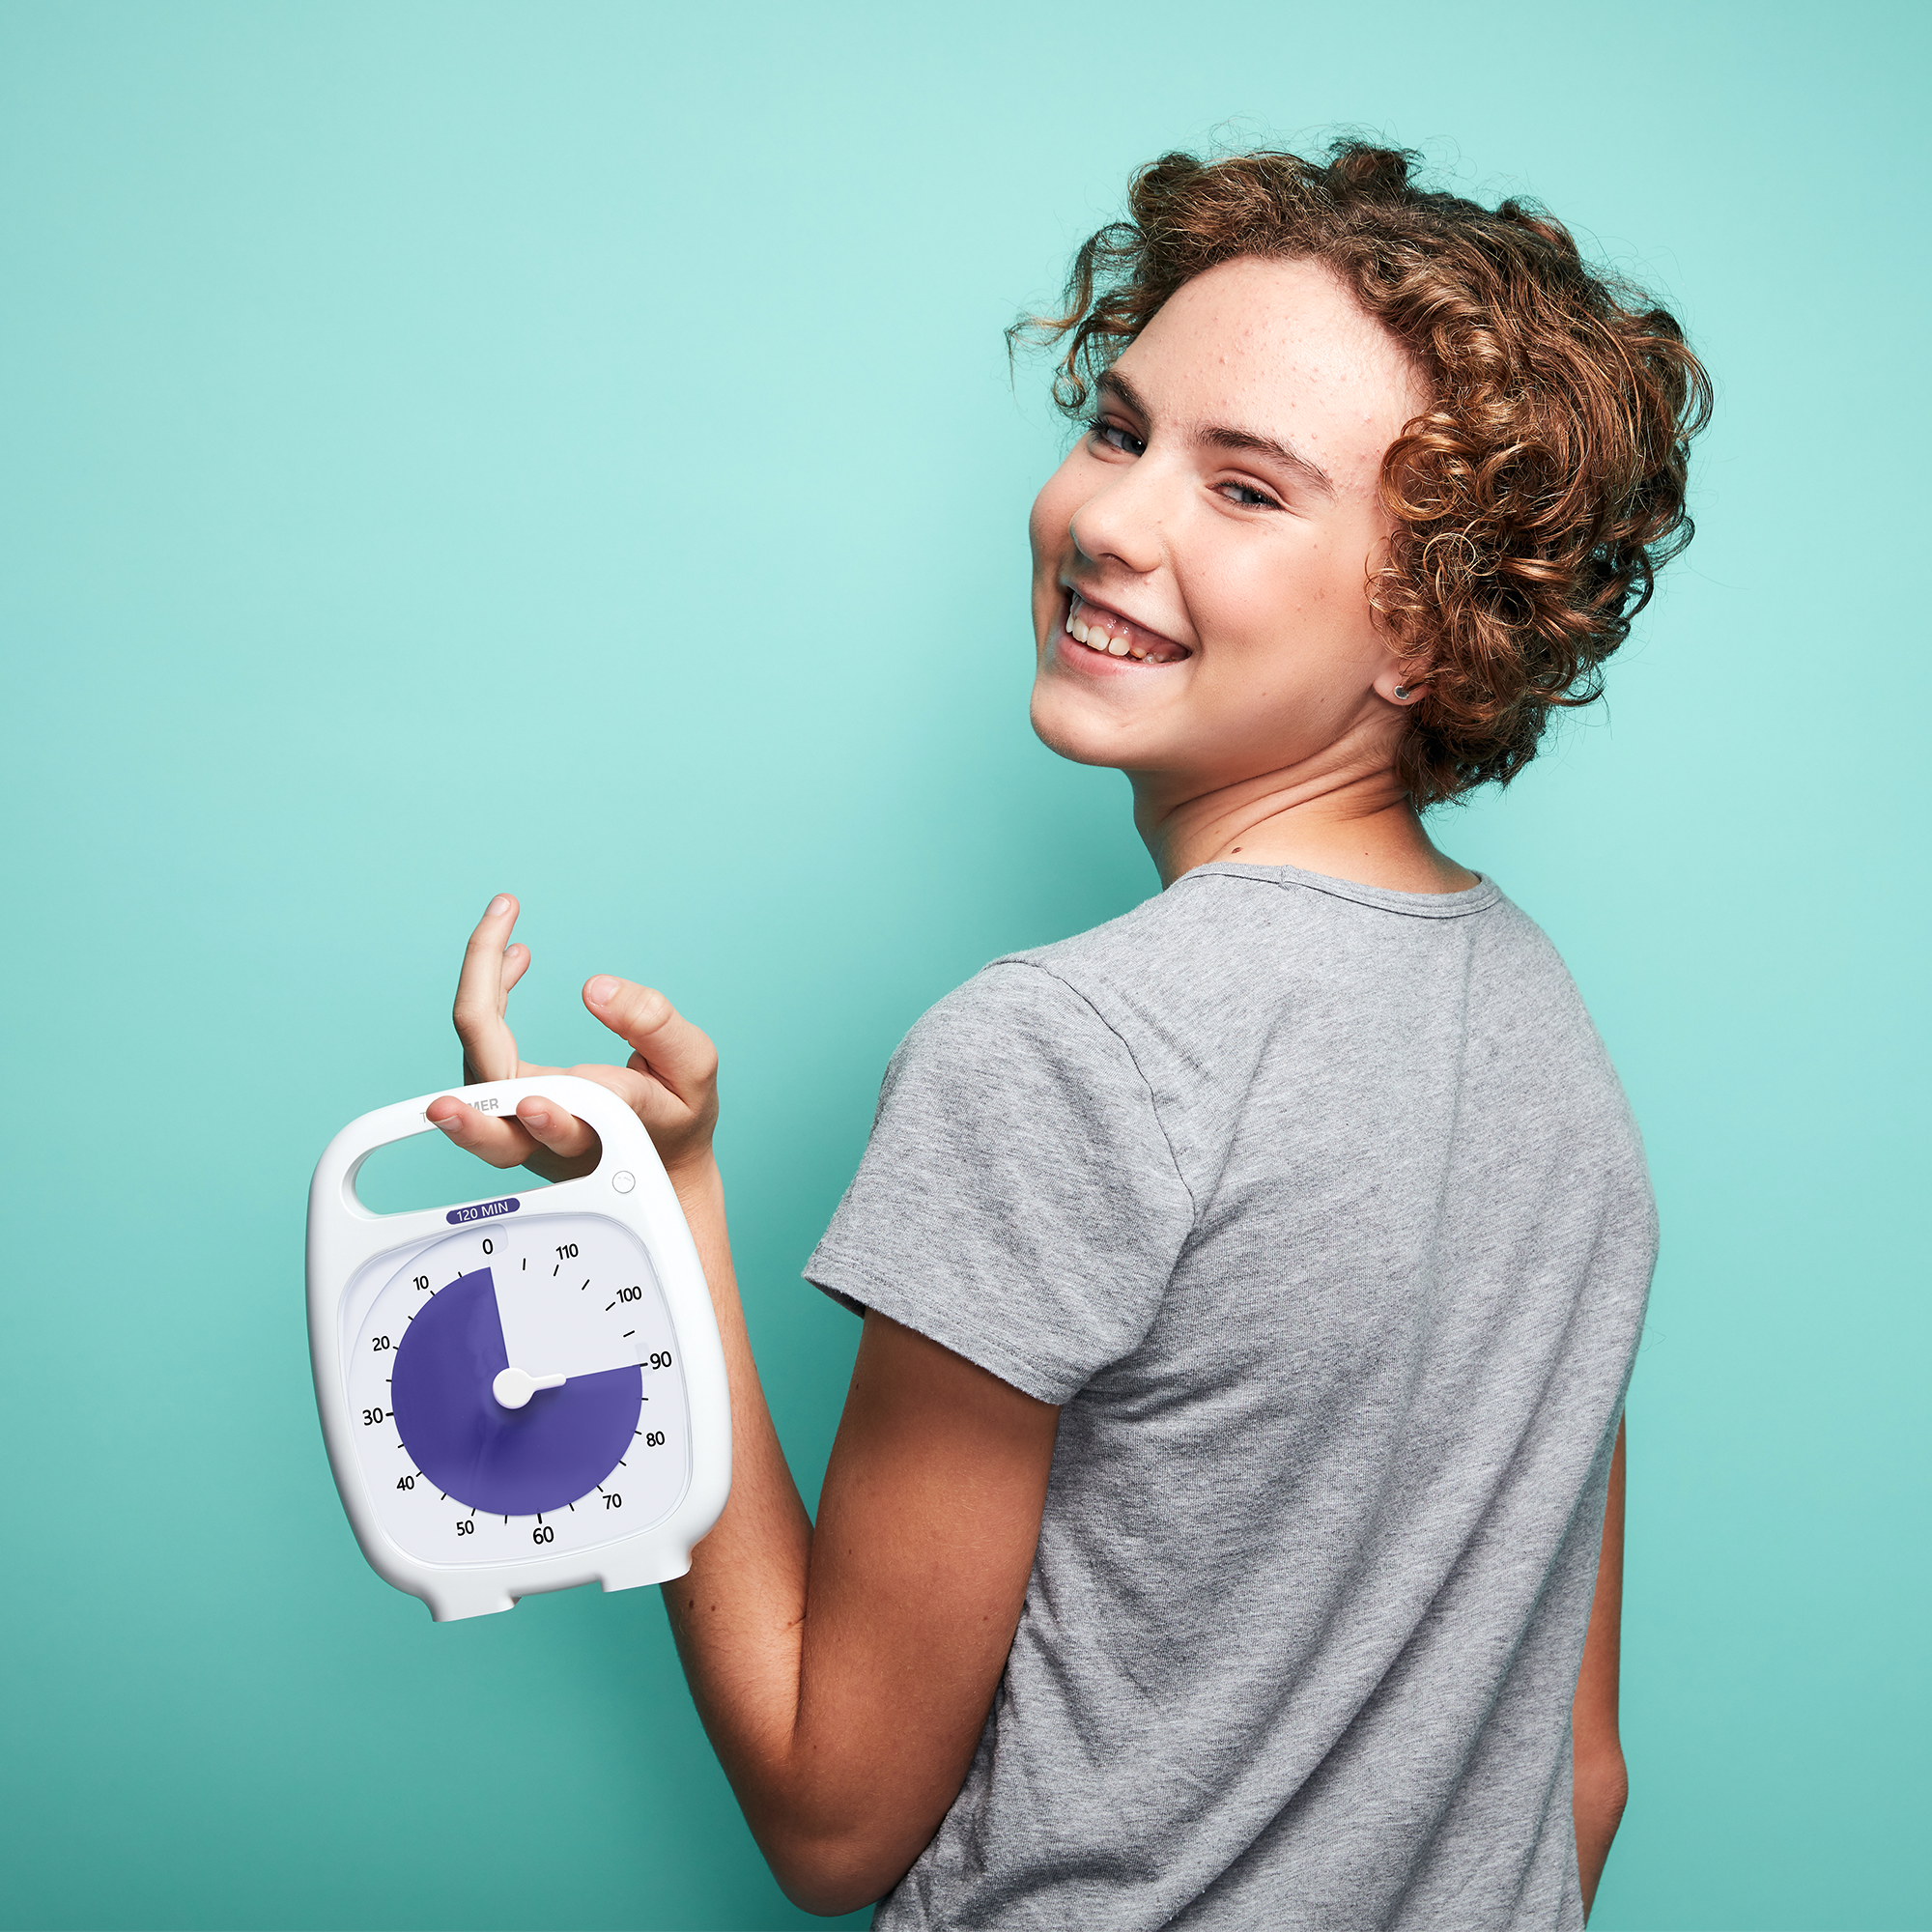 A smiling young woman with curly hair is standing in front of a bright blue background. She is holding the Time Timer 120 Minute timer. The purple disk is set to a 90 minute duration. 